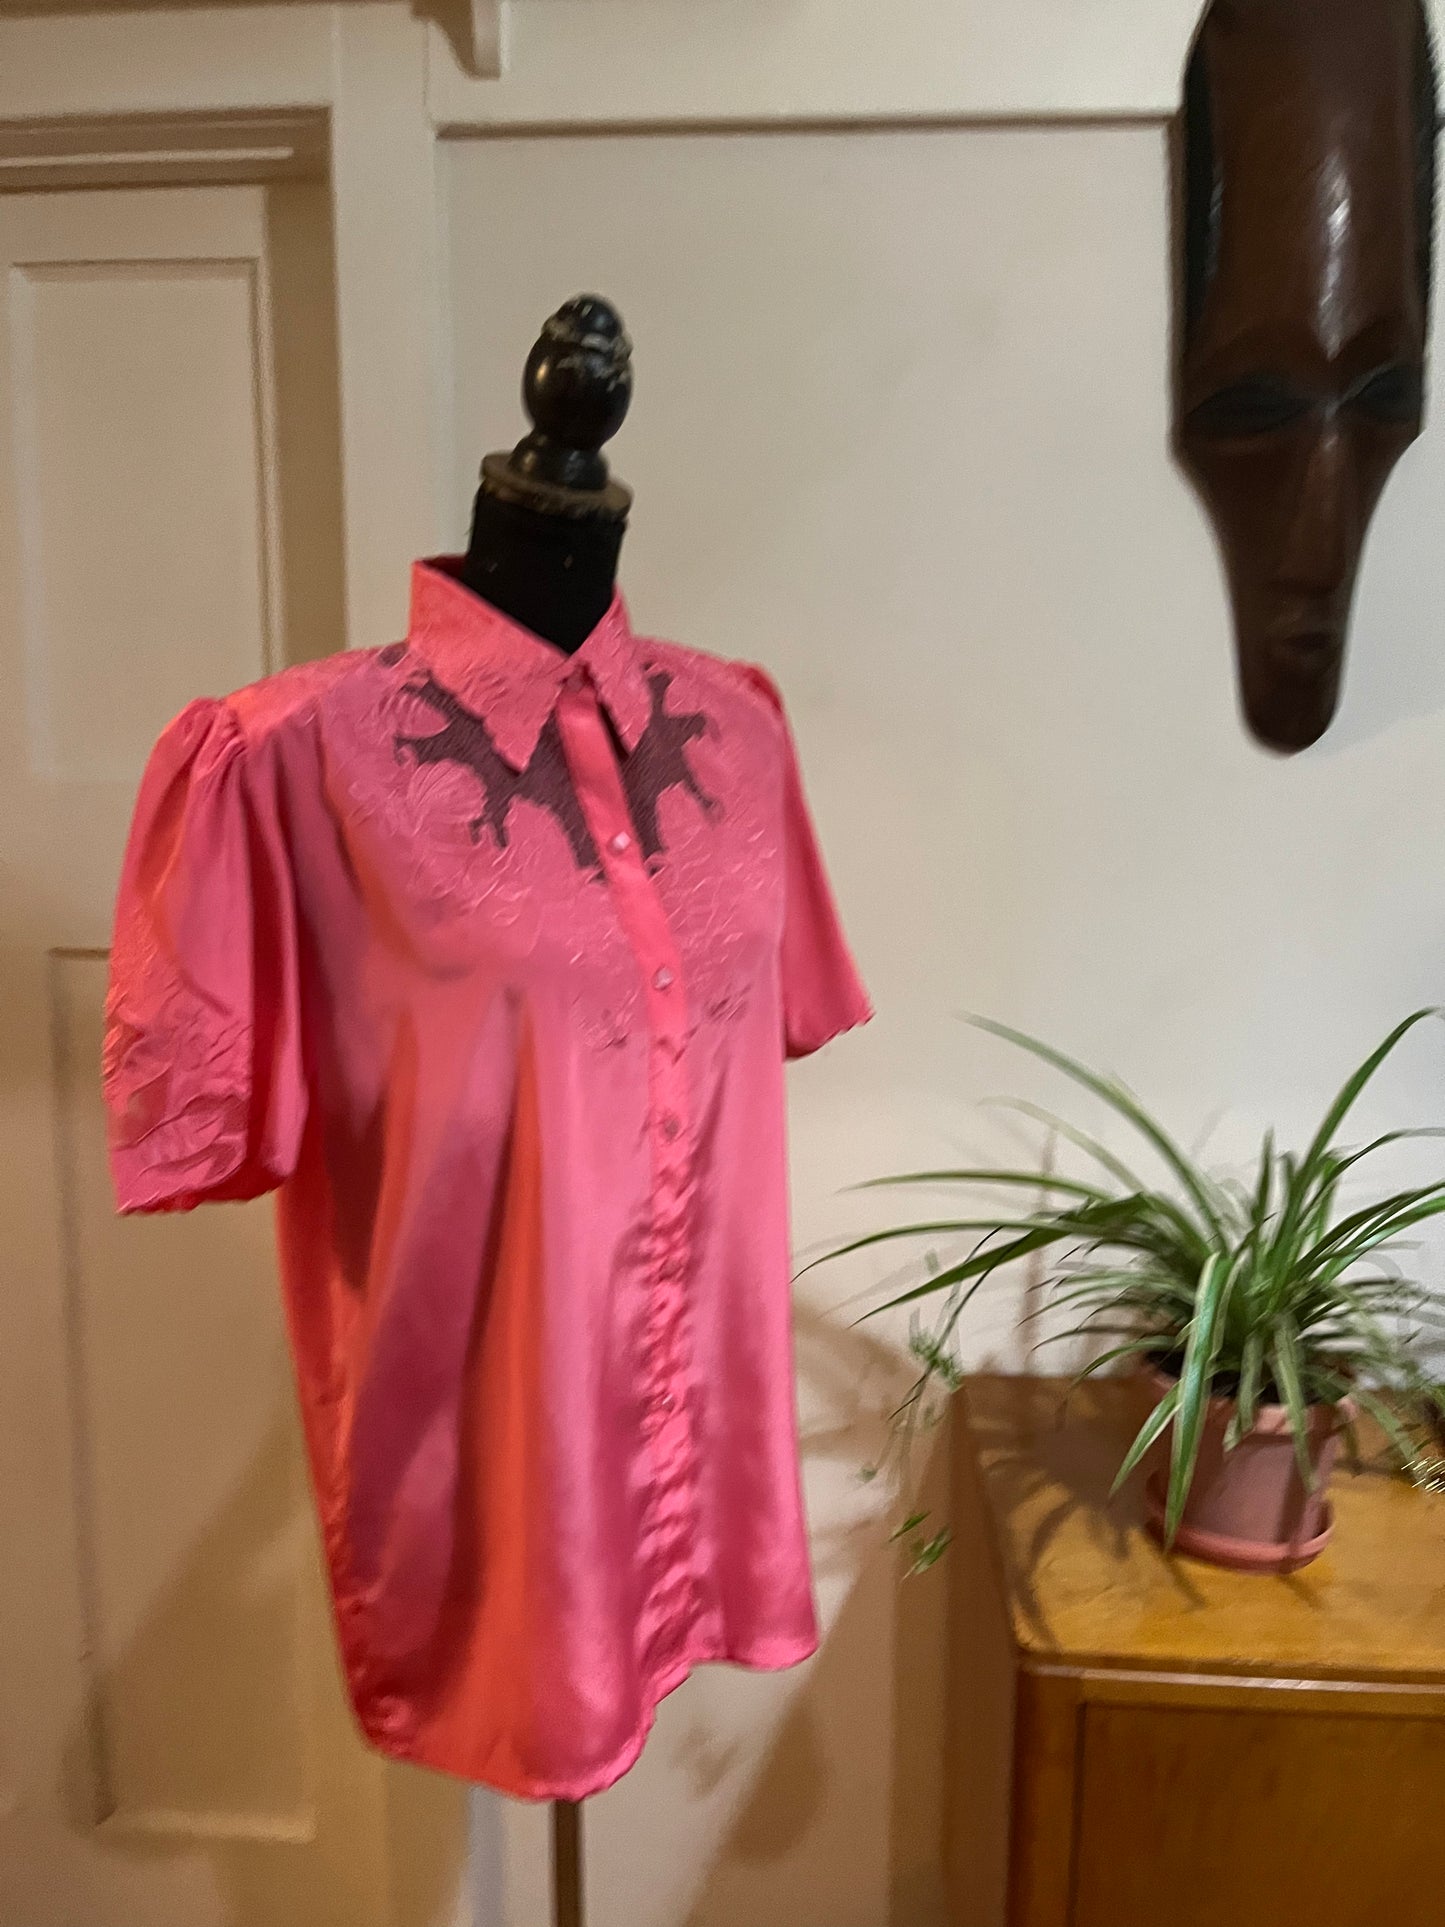 Embroidery Pink Shirt